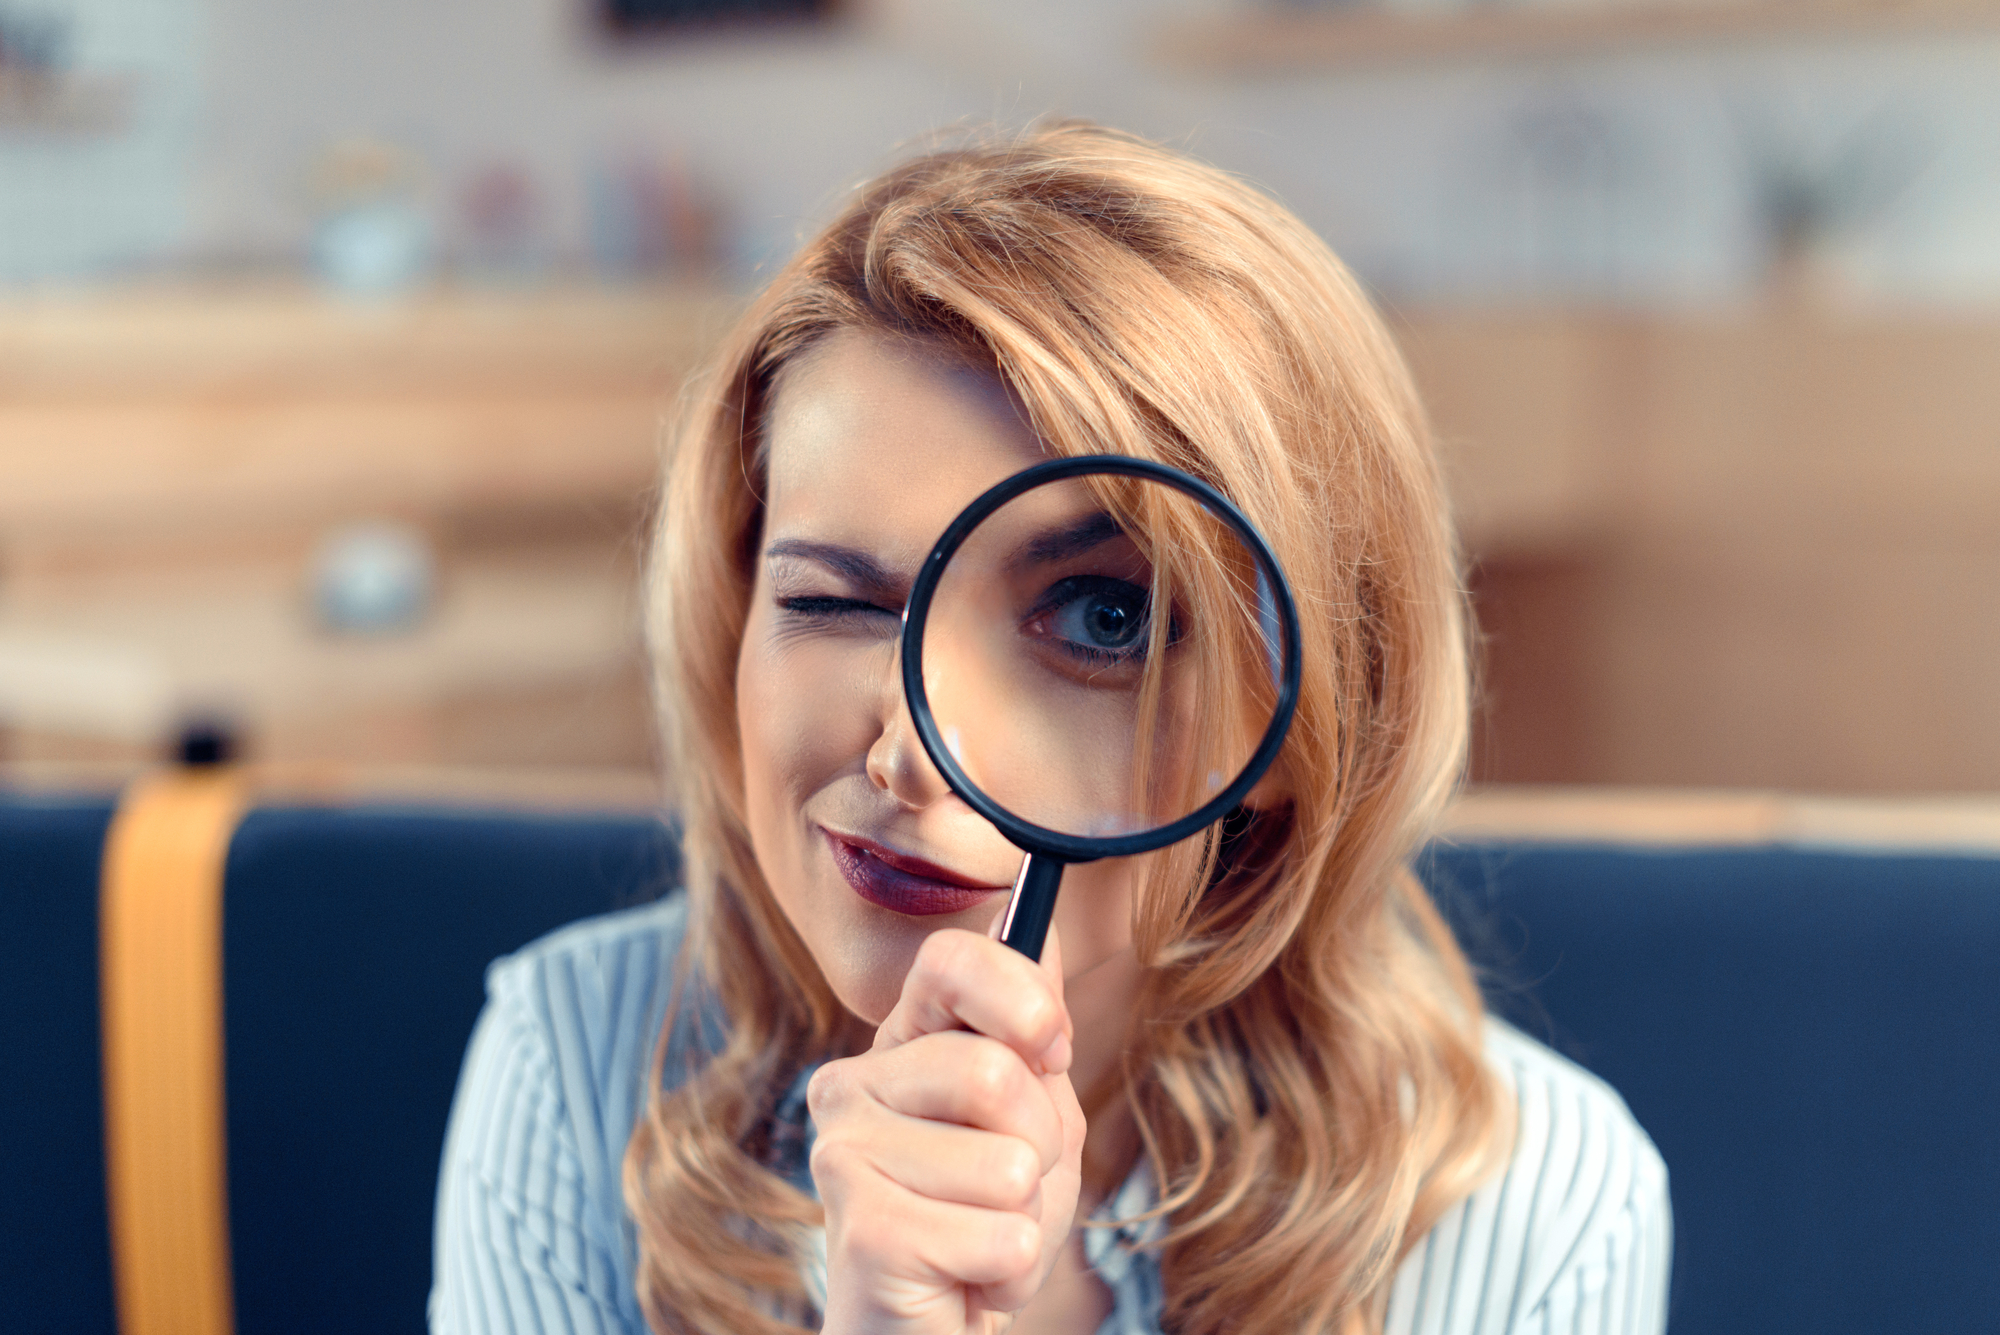 Woman with magnifying glass